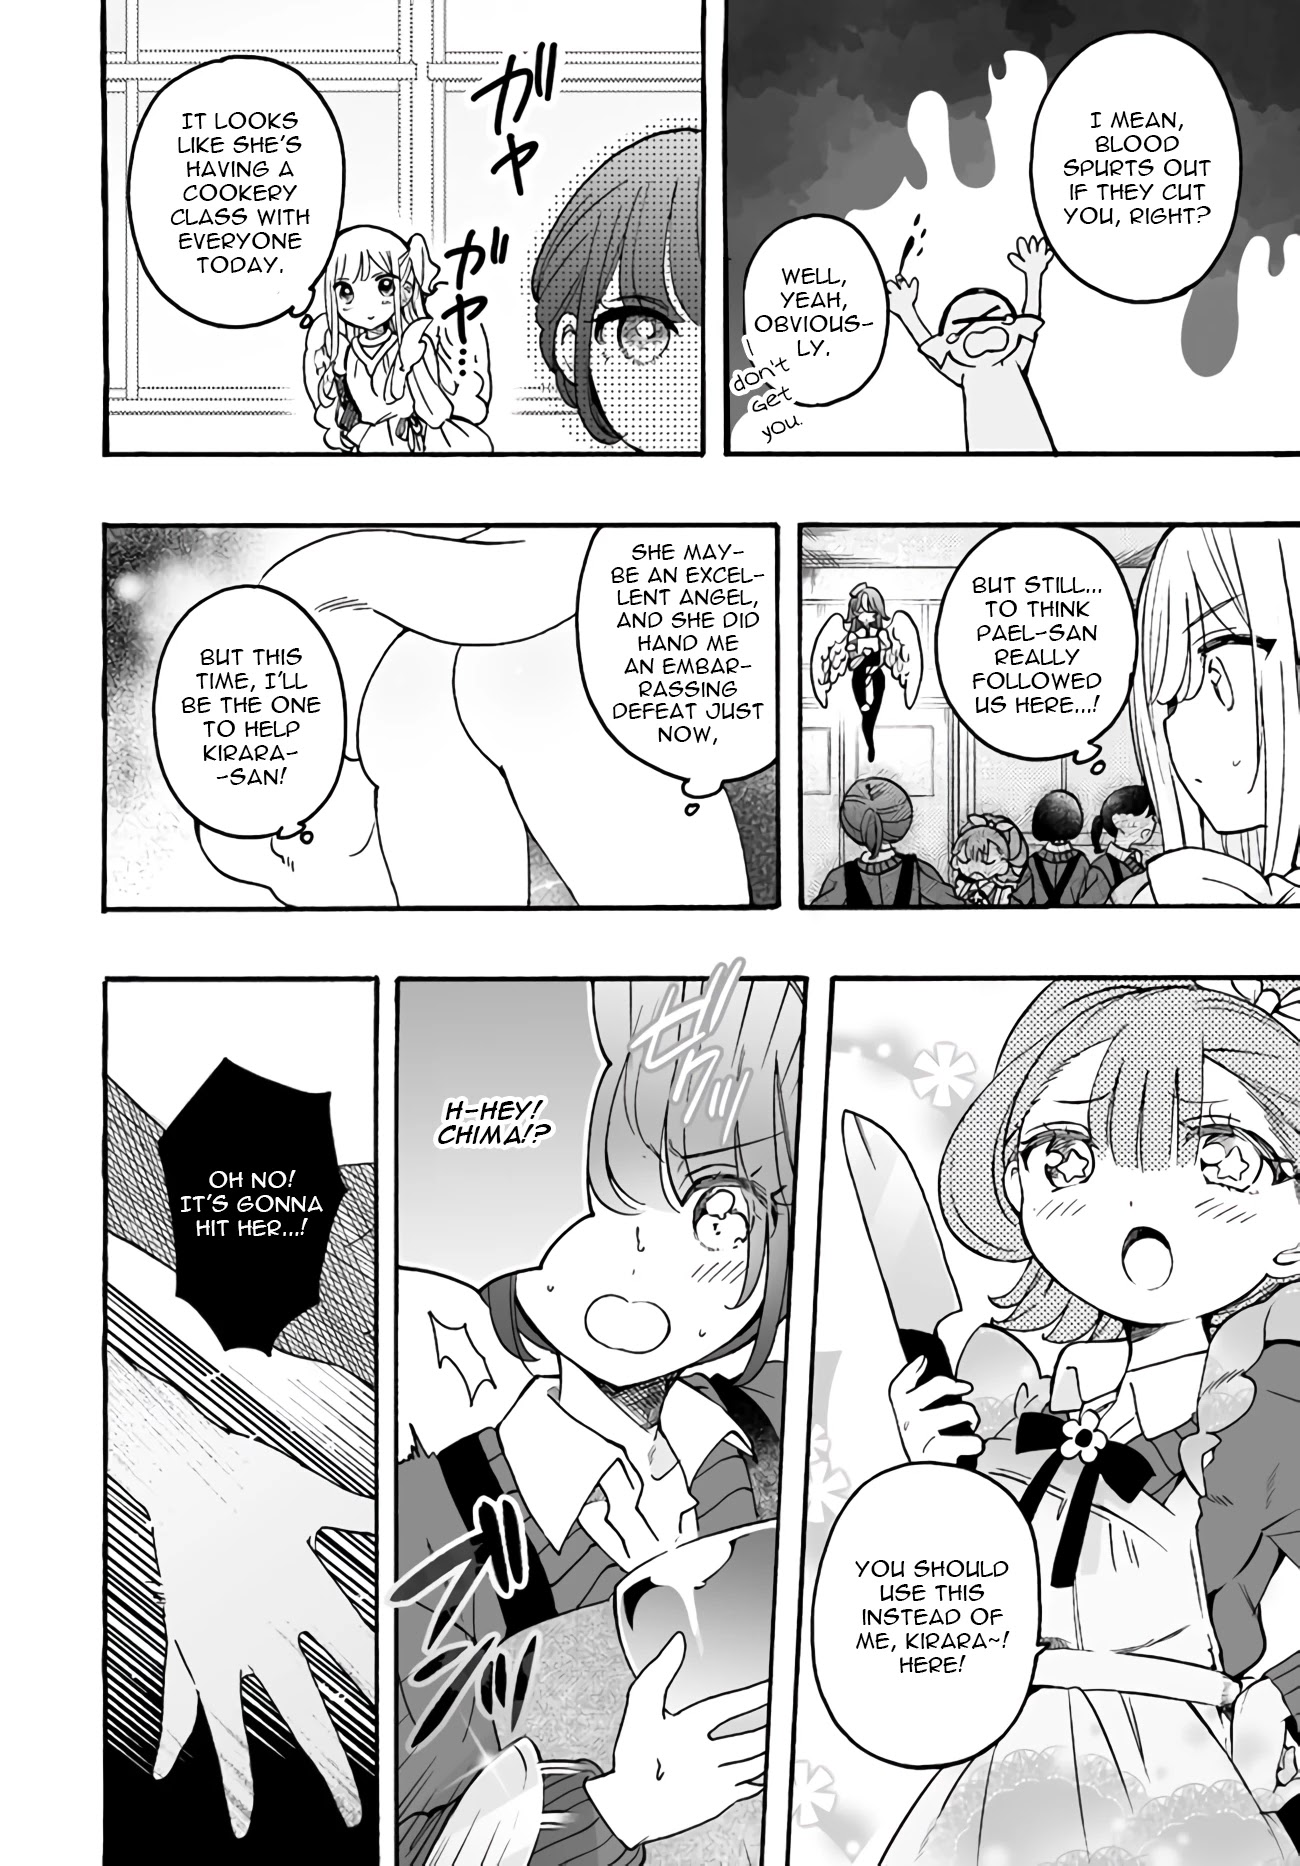 I'm An Elite Angel, But I'm Troubled By An Impregnable High School Girl - Page 2